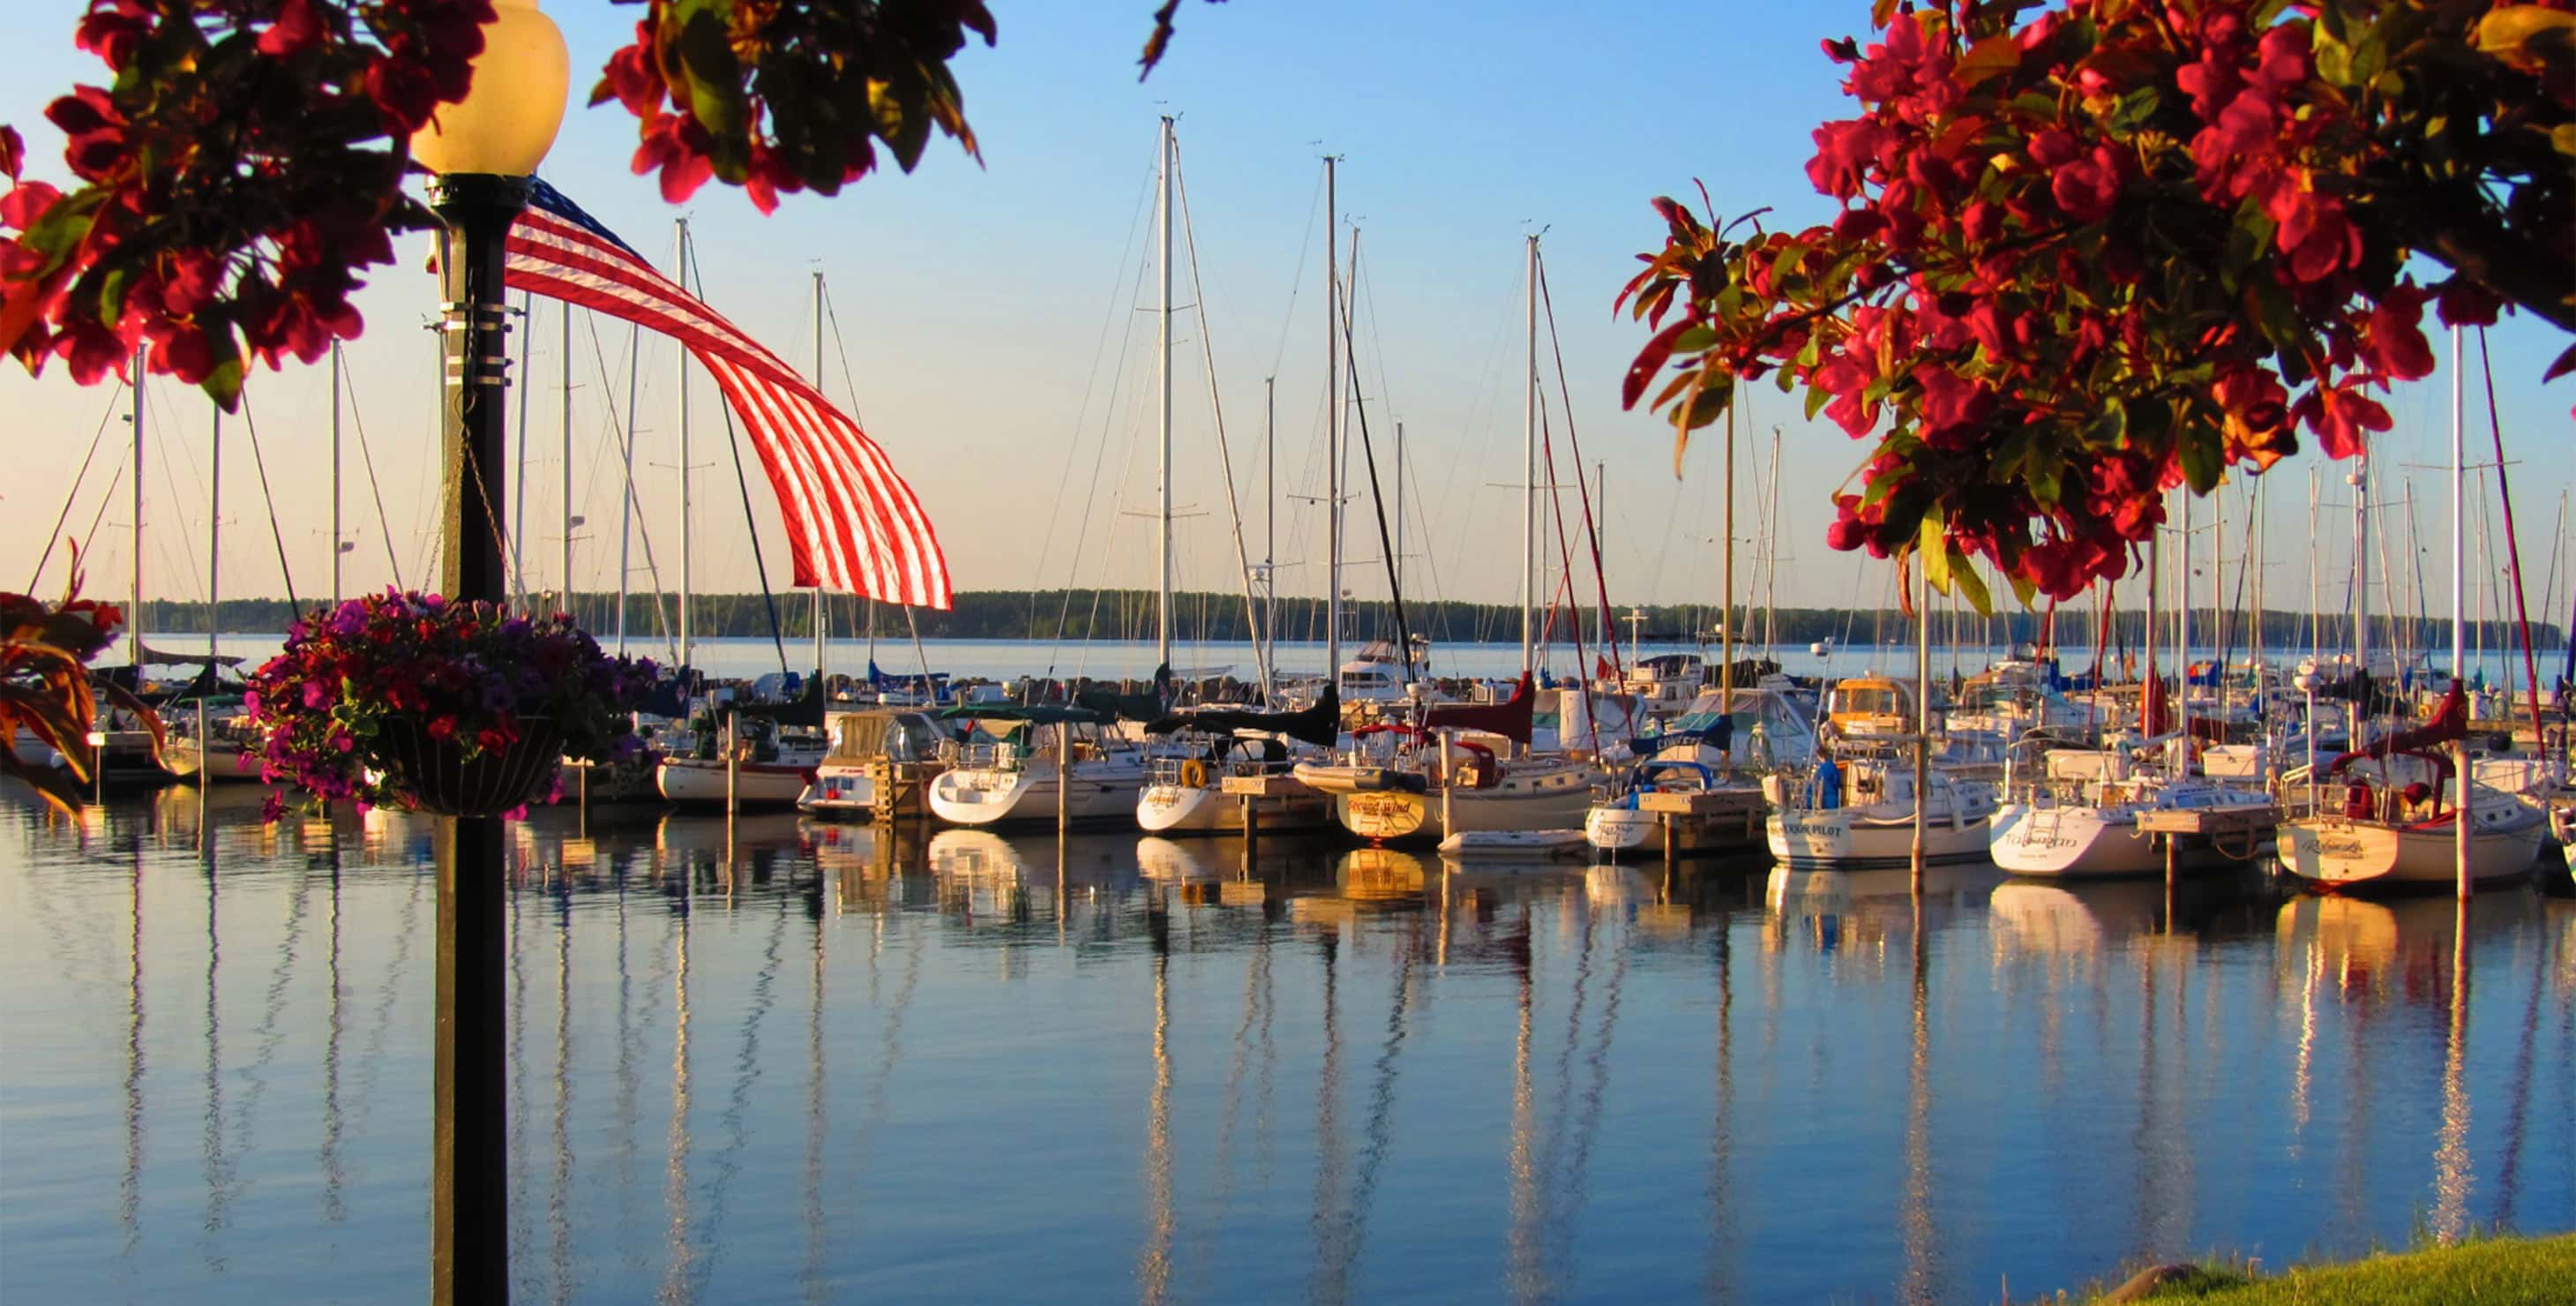 View of boats in the Bayfield Marina